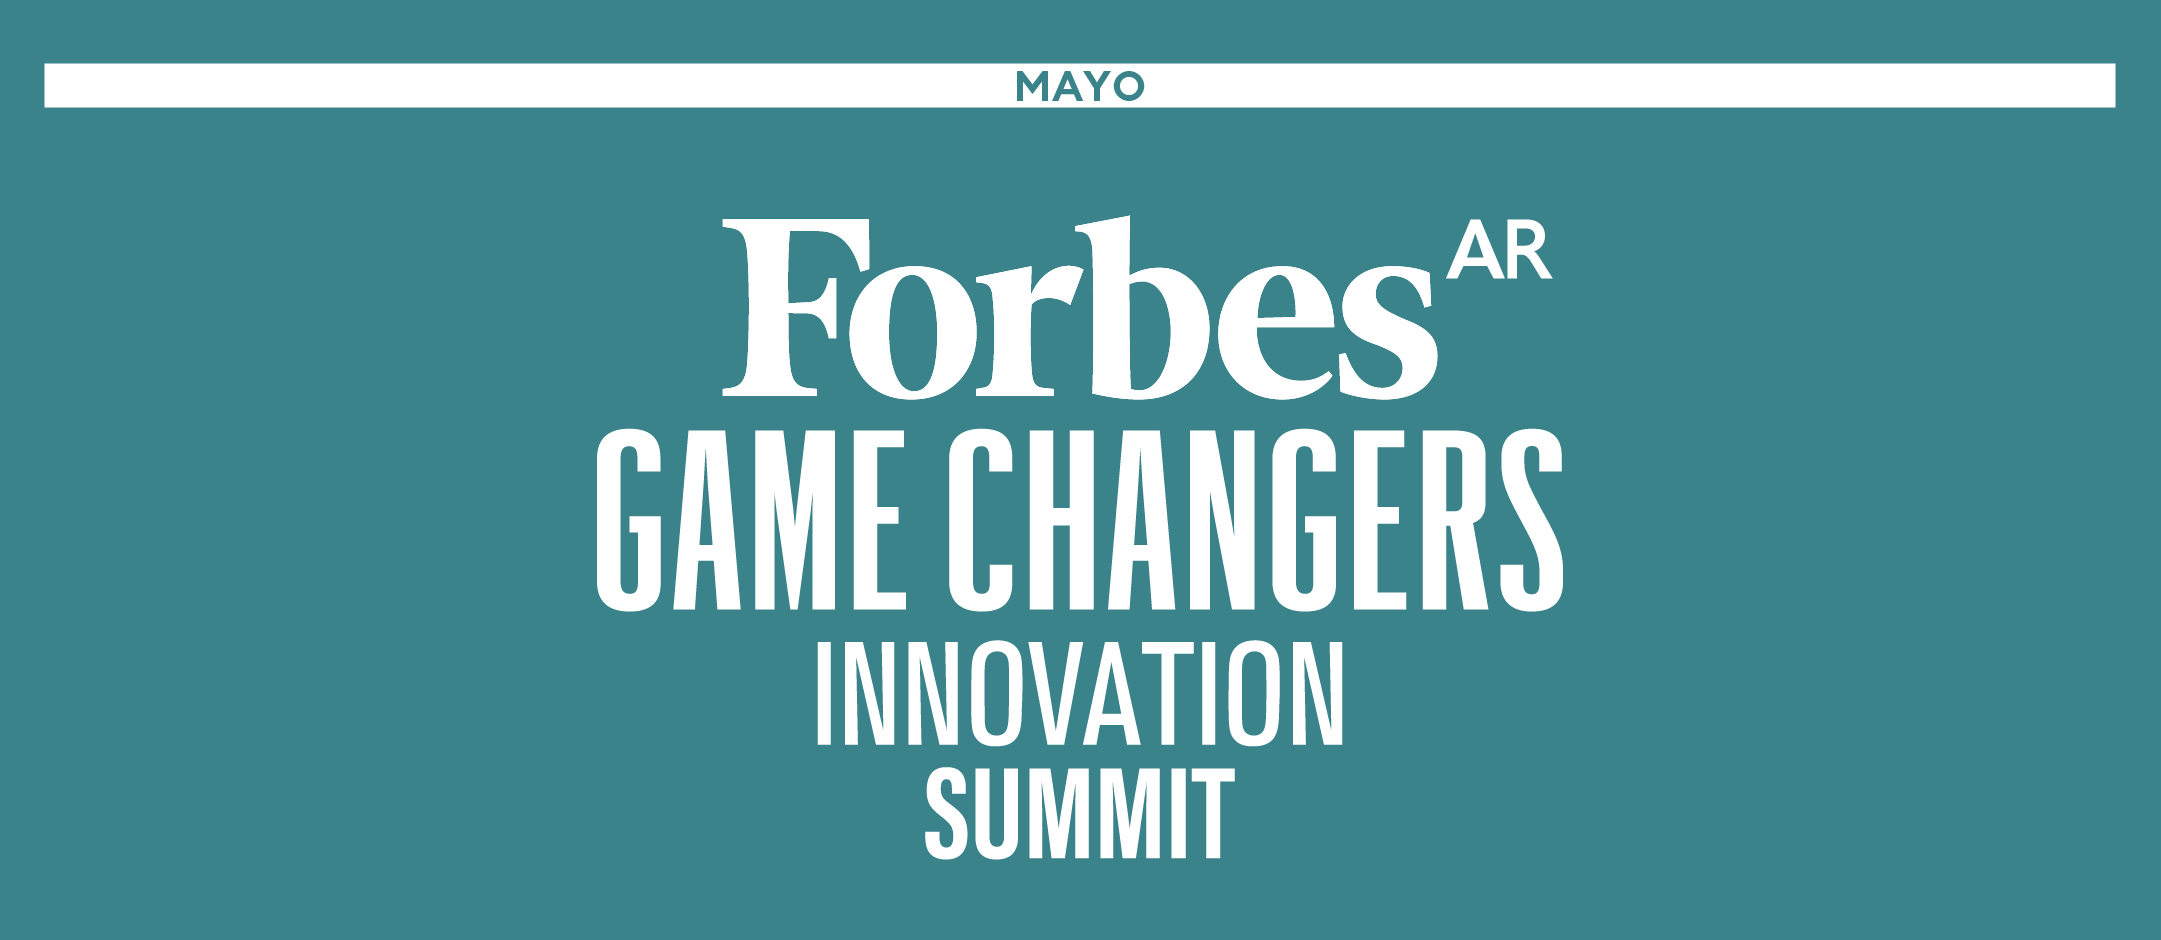 FORBES GAME CHANGERS Summit Forbes Argentina